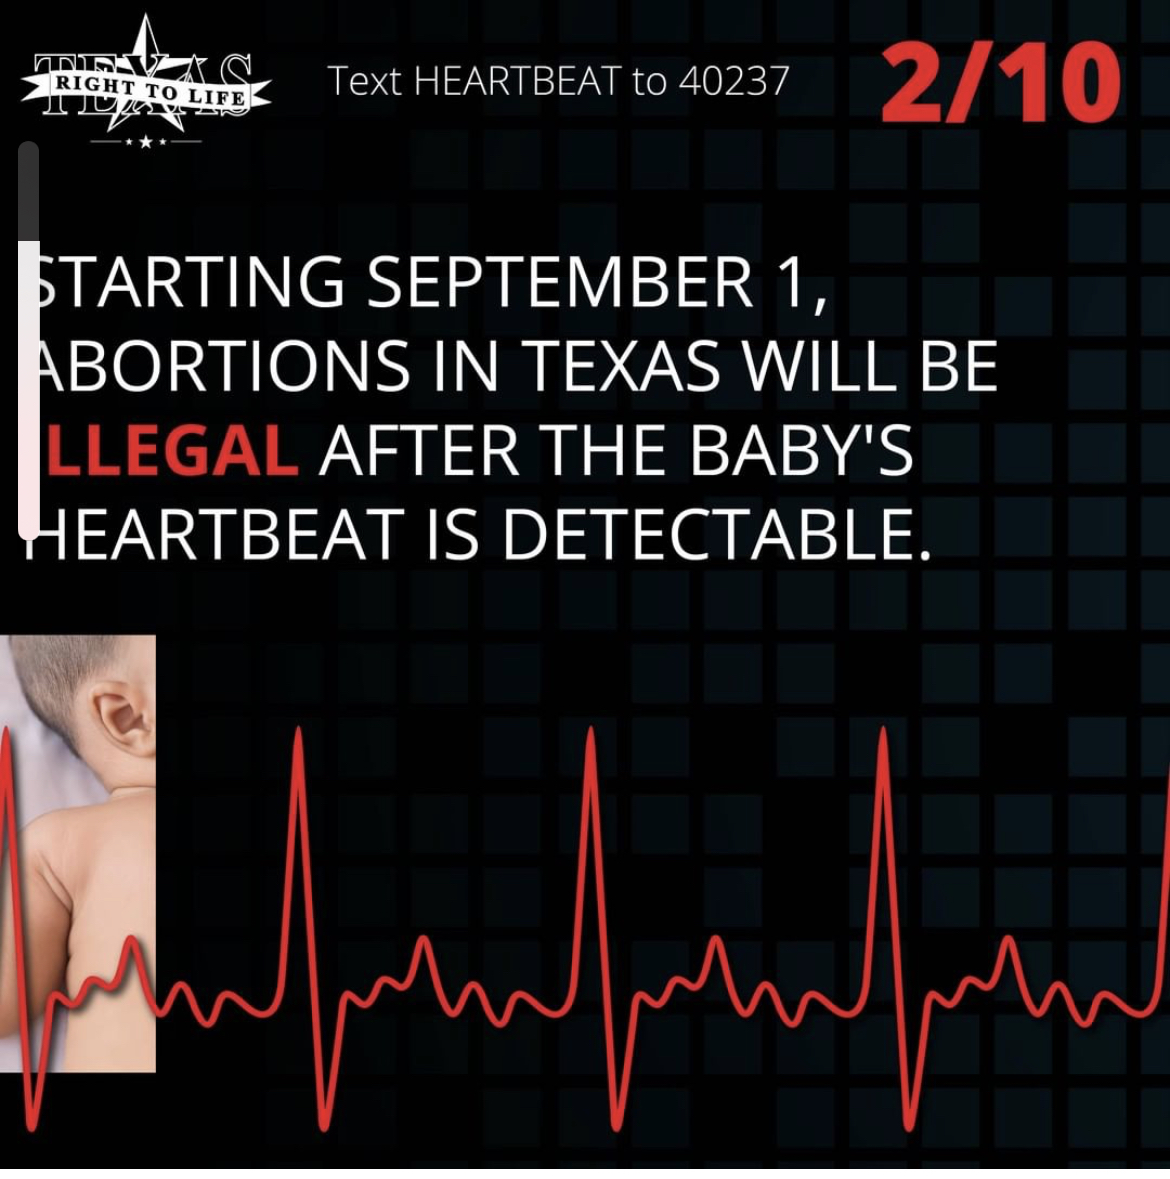 Starting September 1, abortions in Texas will be illegal once a fetal heartbeat is detected